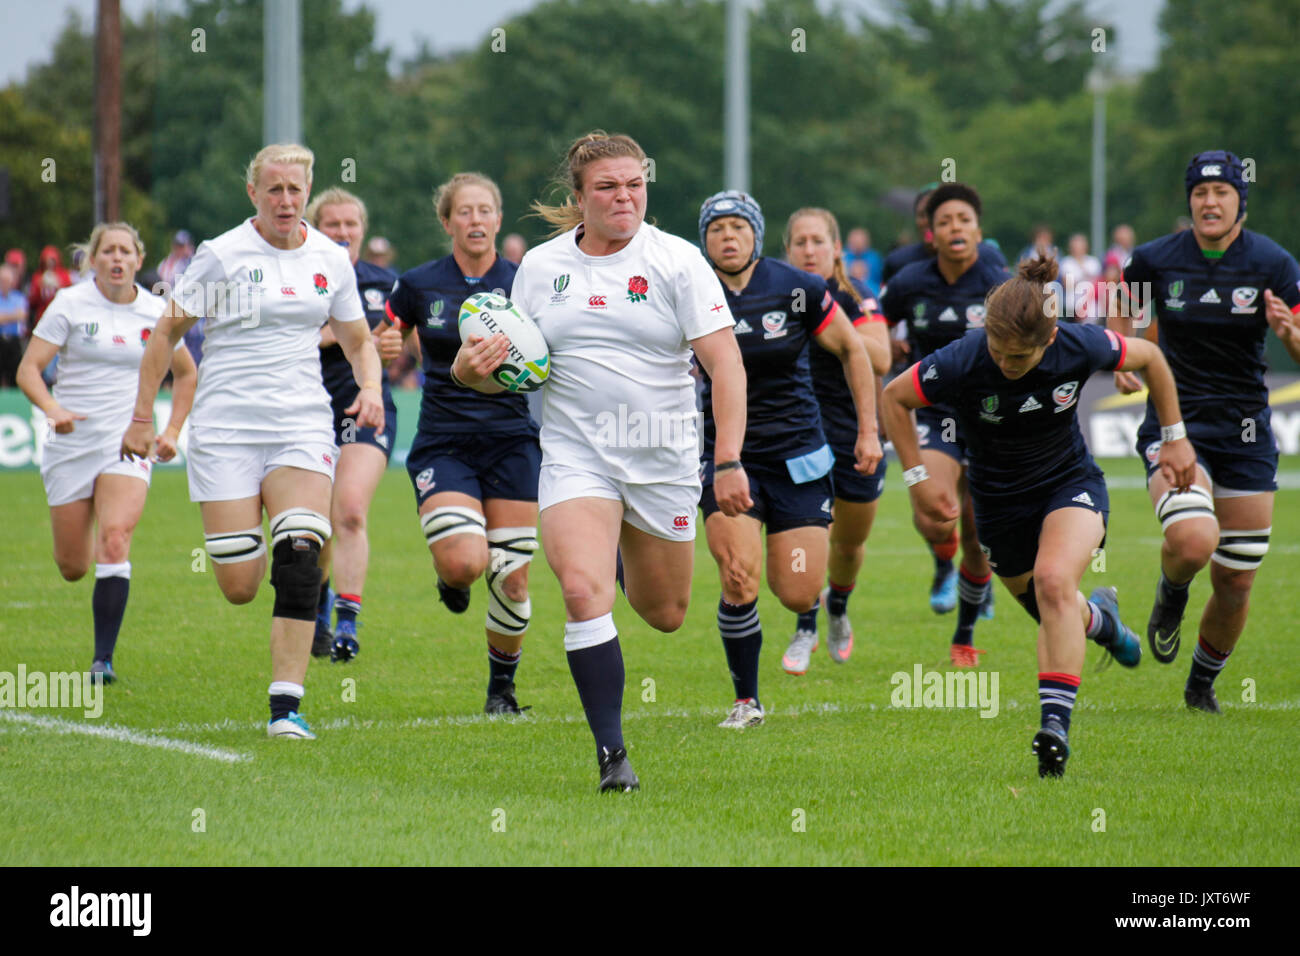 Dublin, Ireland. 17th Aug, 2017. Sarah Bern with the ball during the  England v USA match at the Women's Rugby World Cup at Billings Park UCD,  Dublin. FT: England 47 - 26